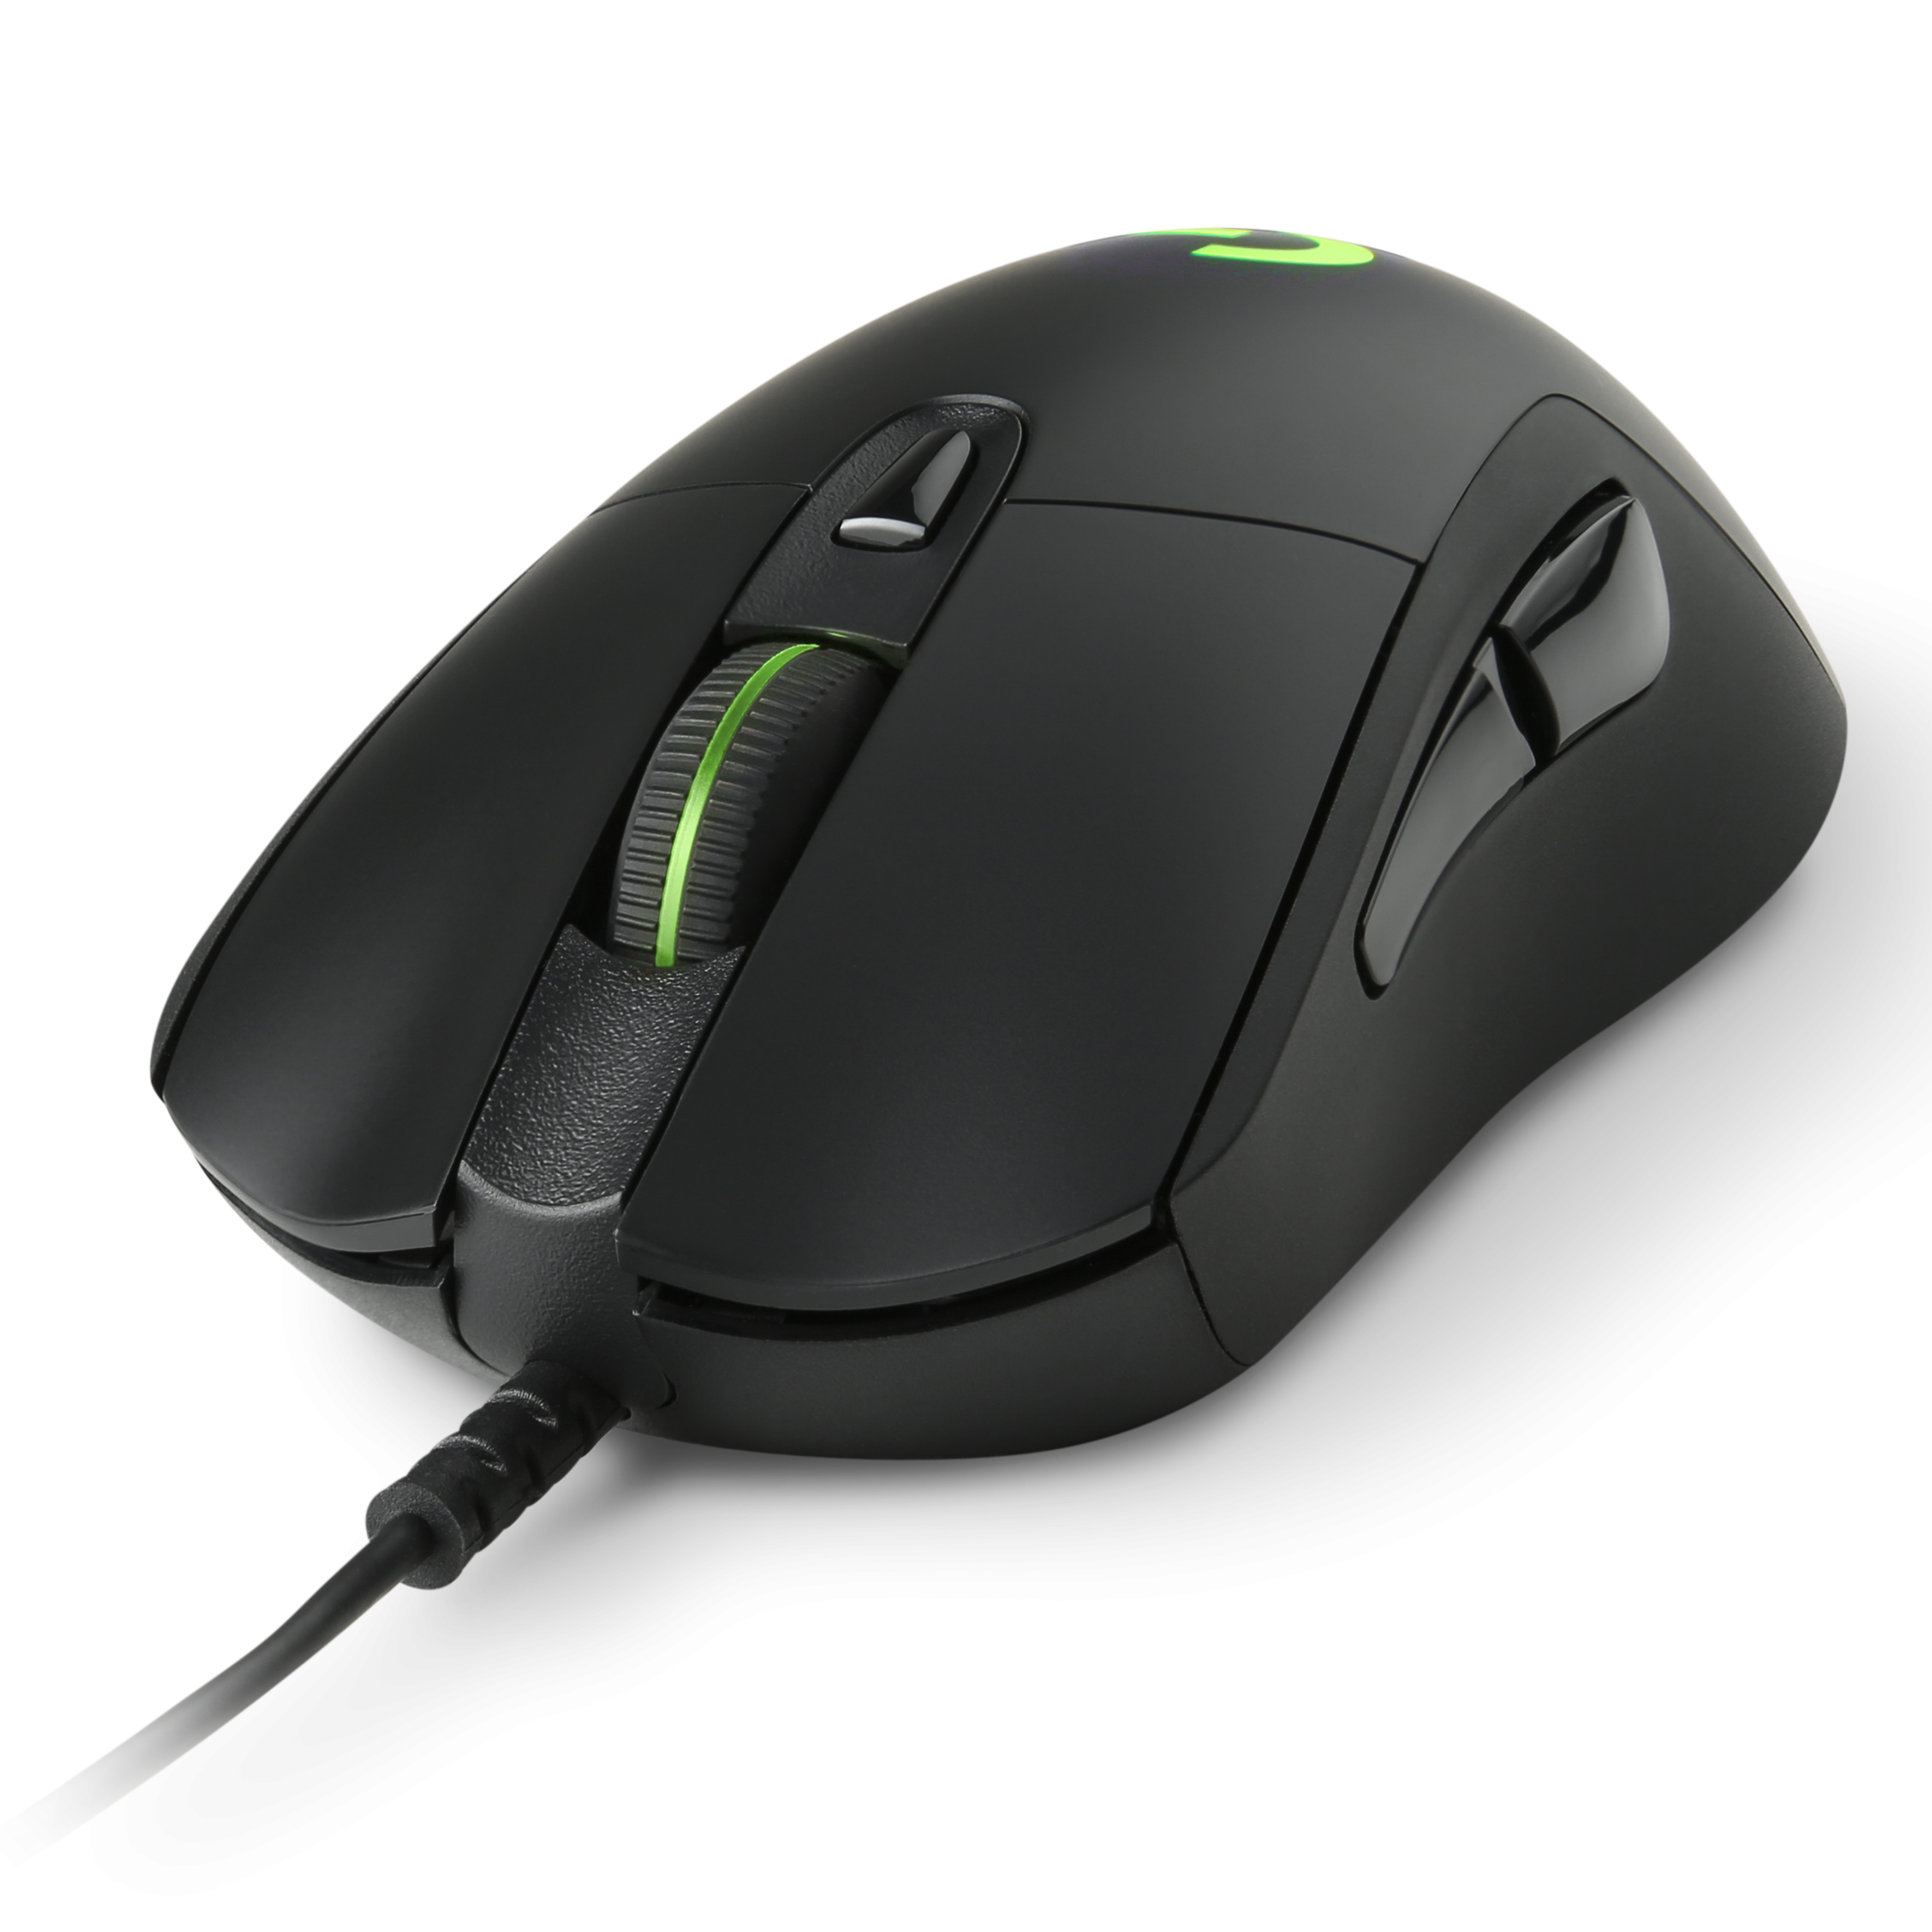 Logitech G403 HERO - TEST AND REVIEW 